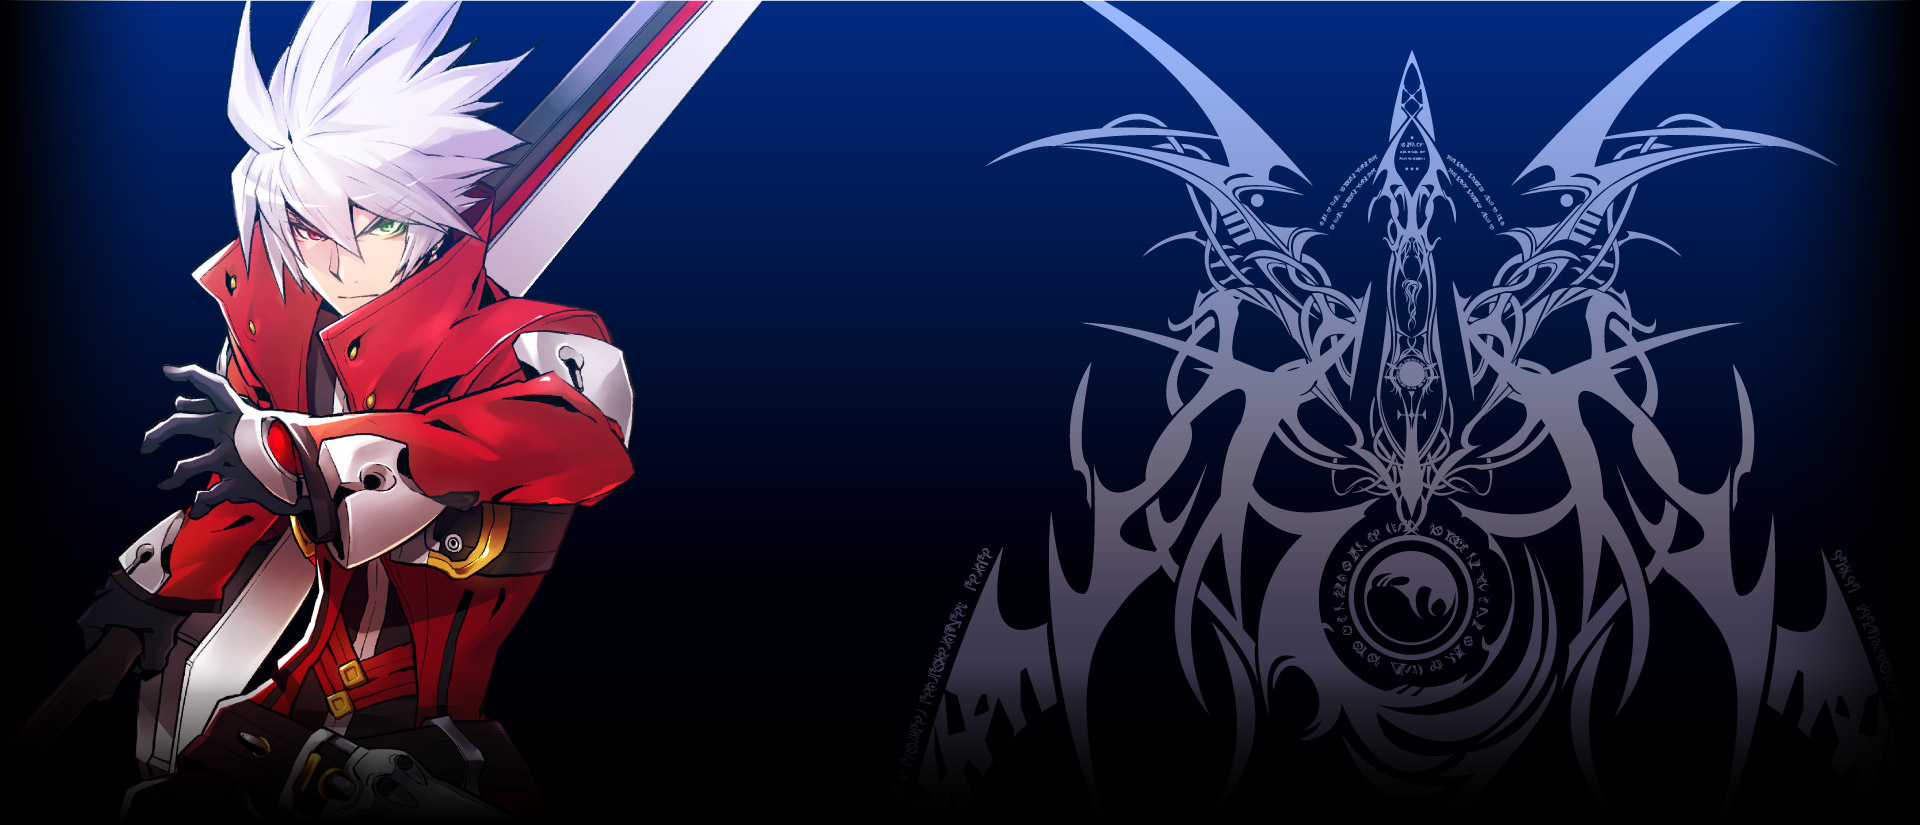 Blazblue Centralfiction HD Wallpaper And Background Image